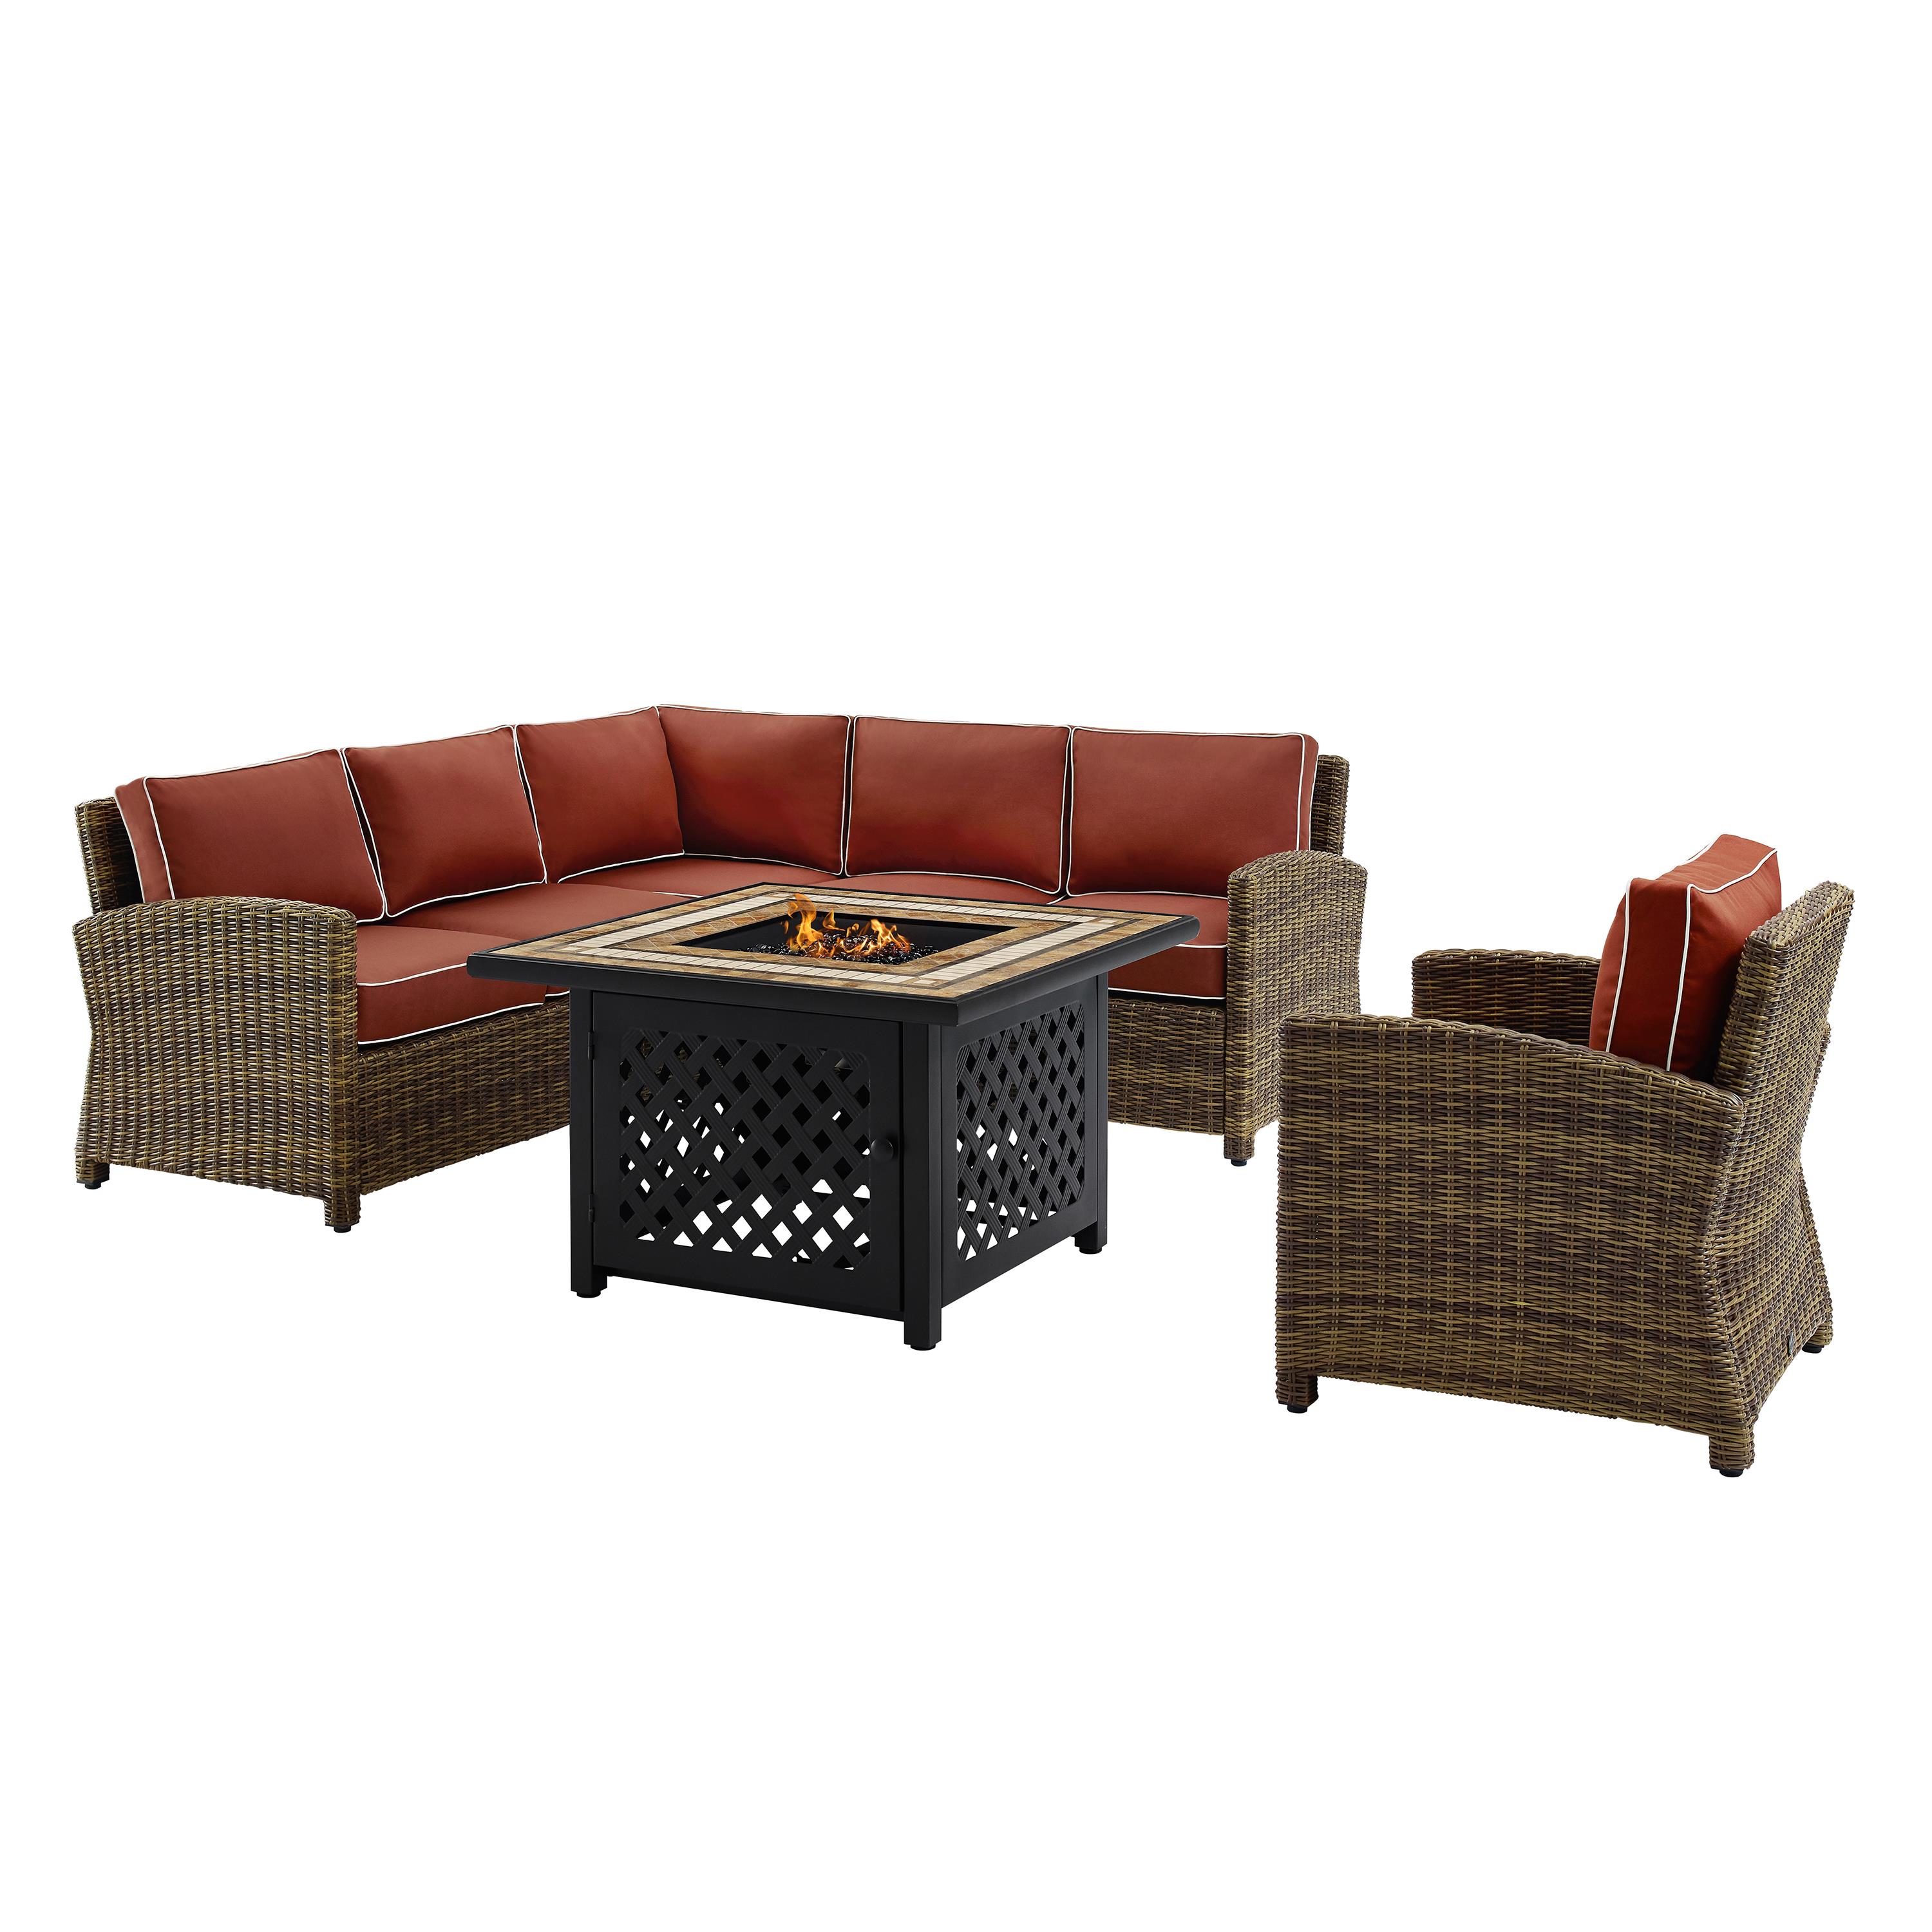 Bradenton 5Pc Outdoor Wicker Sectional Set W/Fire Table Weathered Brown/Sangria - Right Corner Loveseat, Left Corner Loveseat, Corner Chair, Armchair, & Tucson Fire Table - image 5 of 9